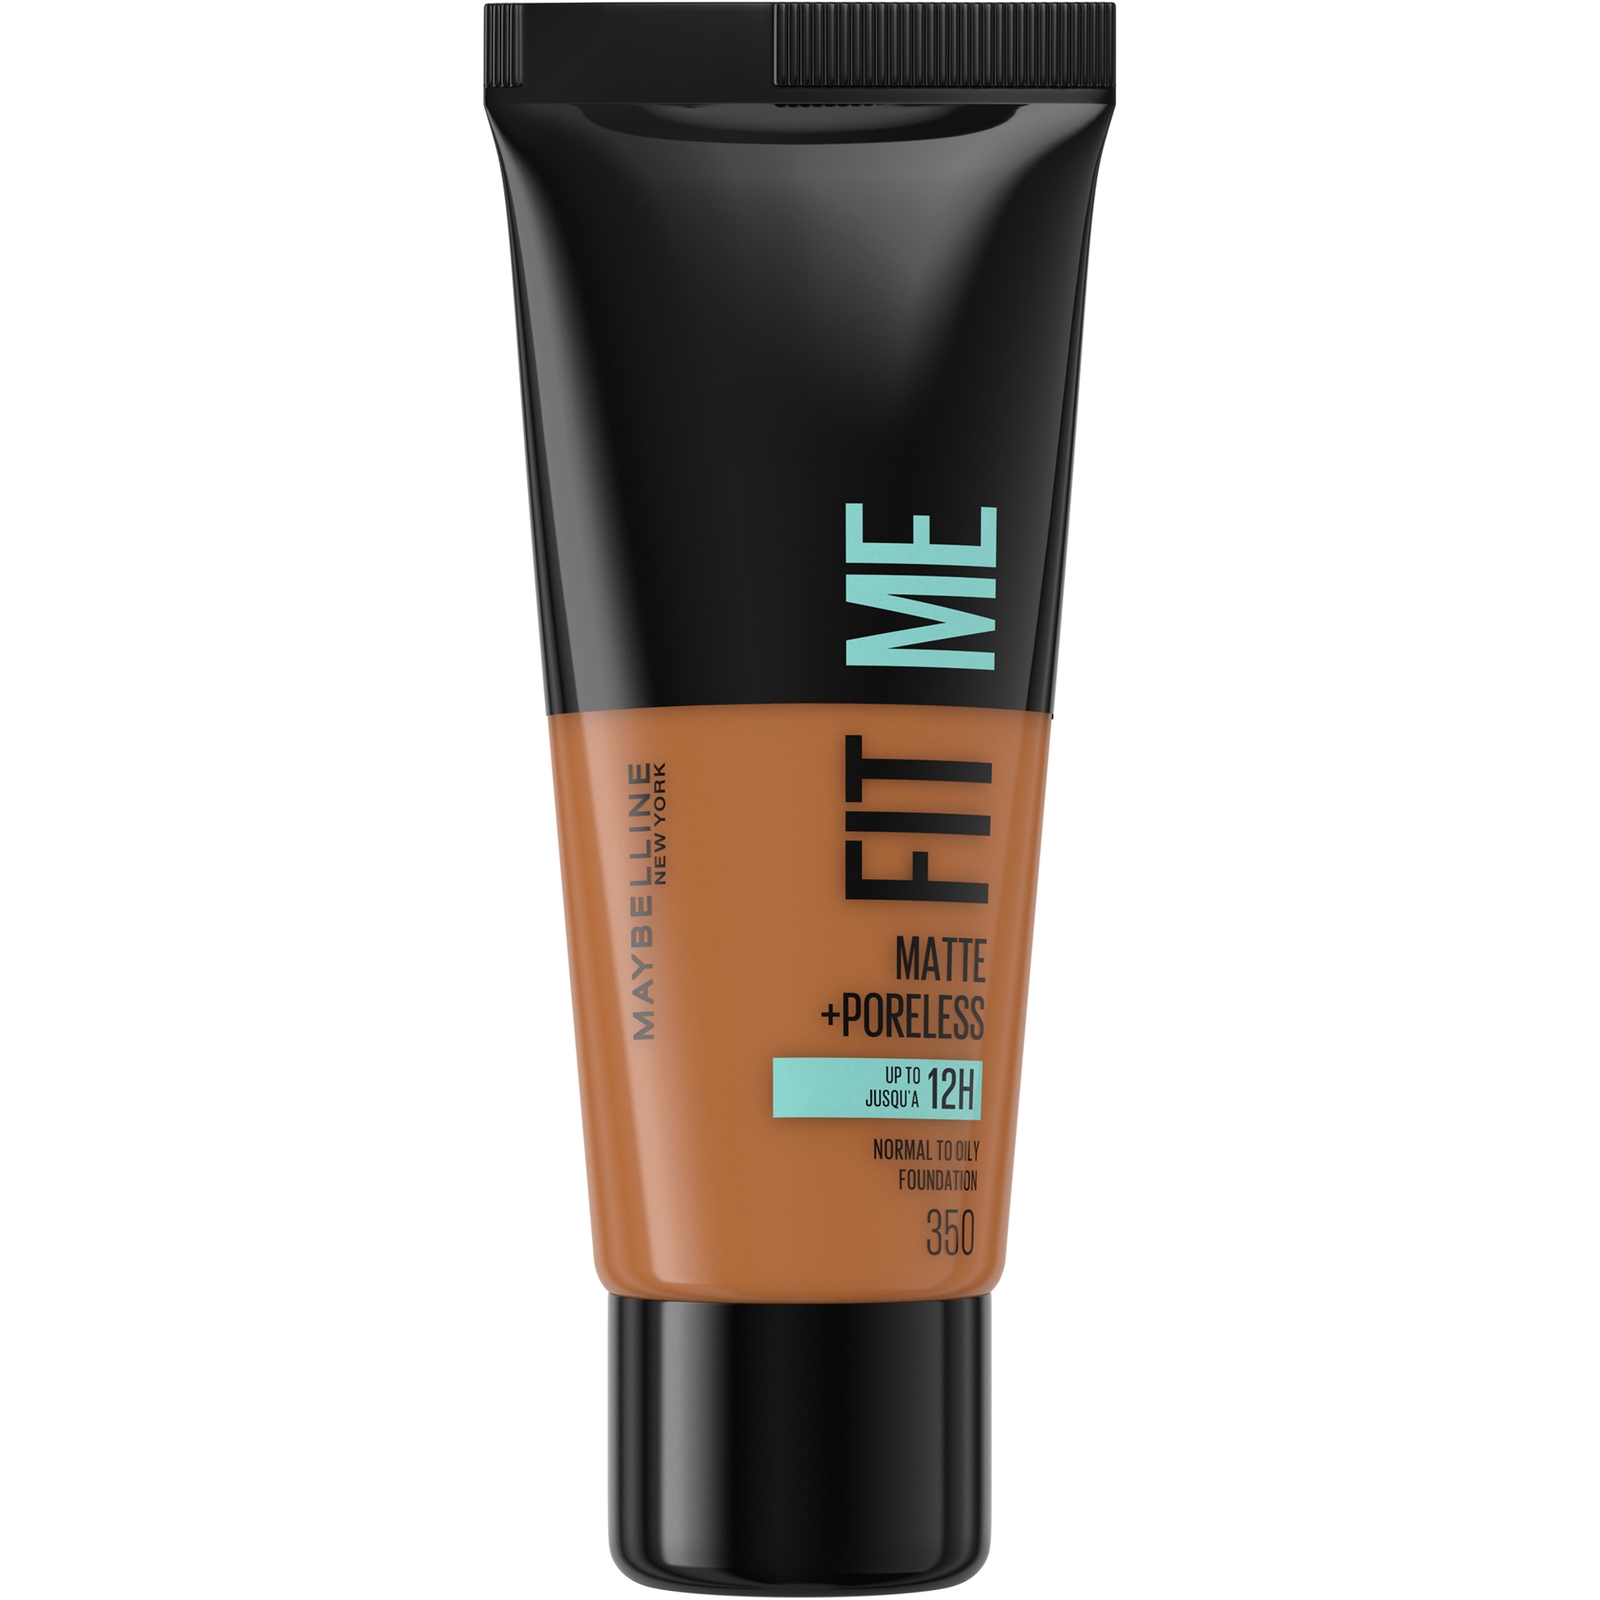 Maybelline Fit Me! Matte and Poreless Foundation 30ml (Various Shades) - 350 Caramel